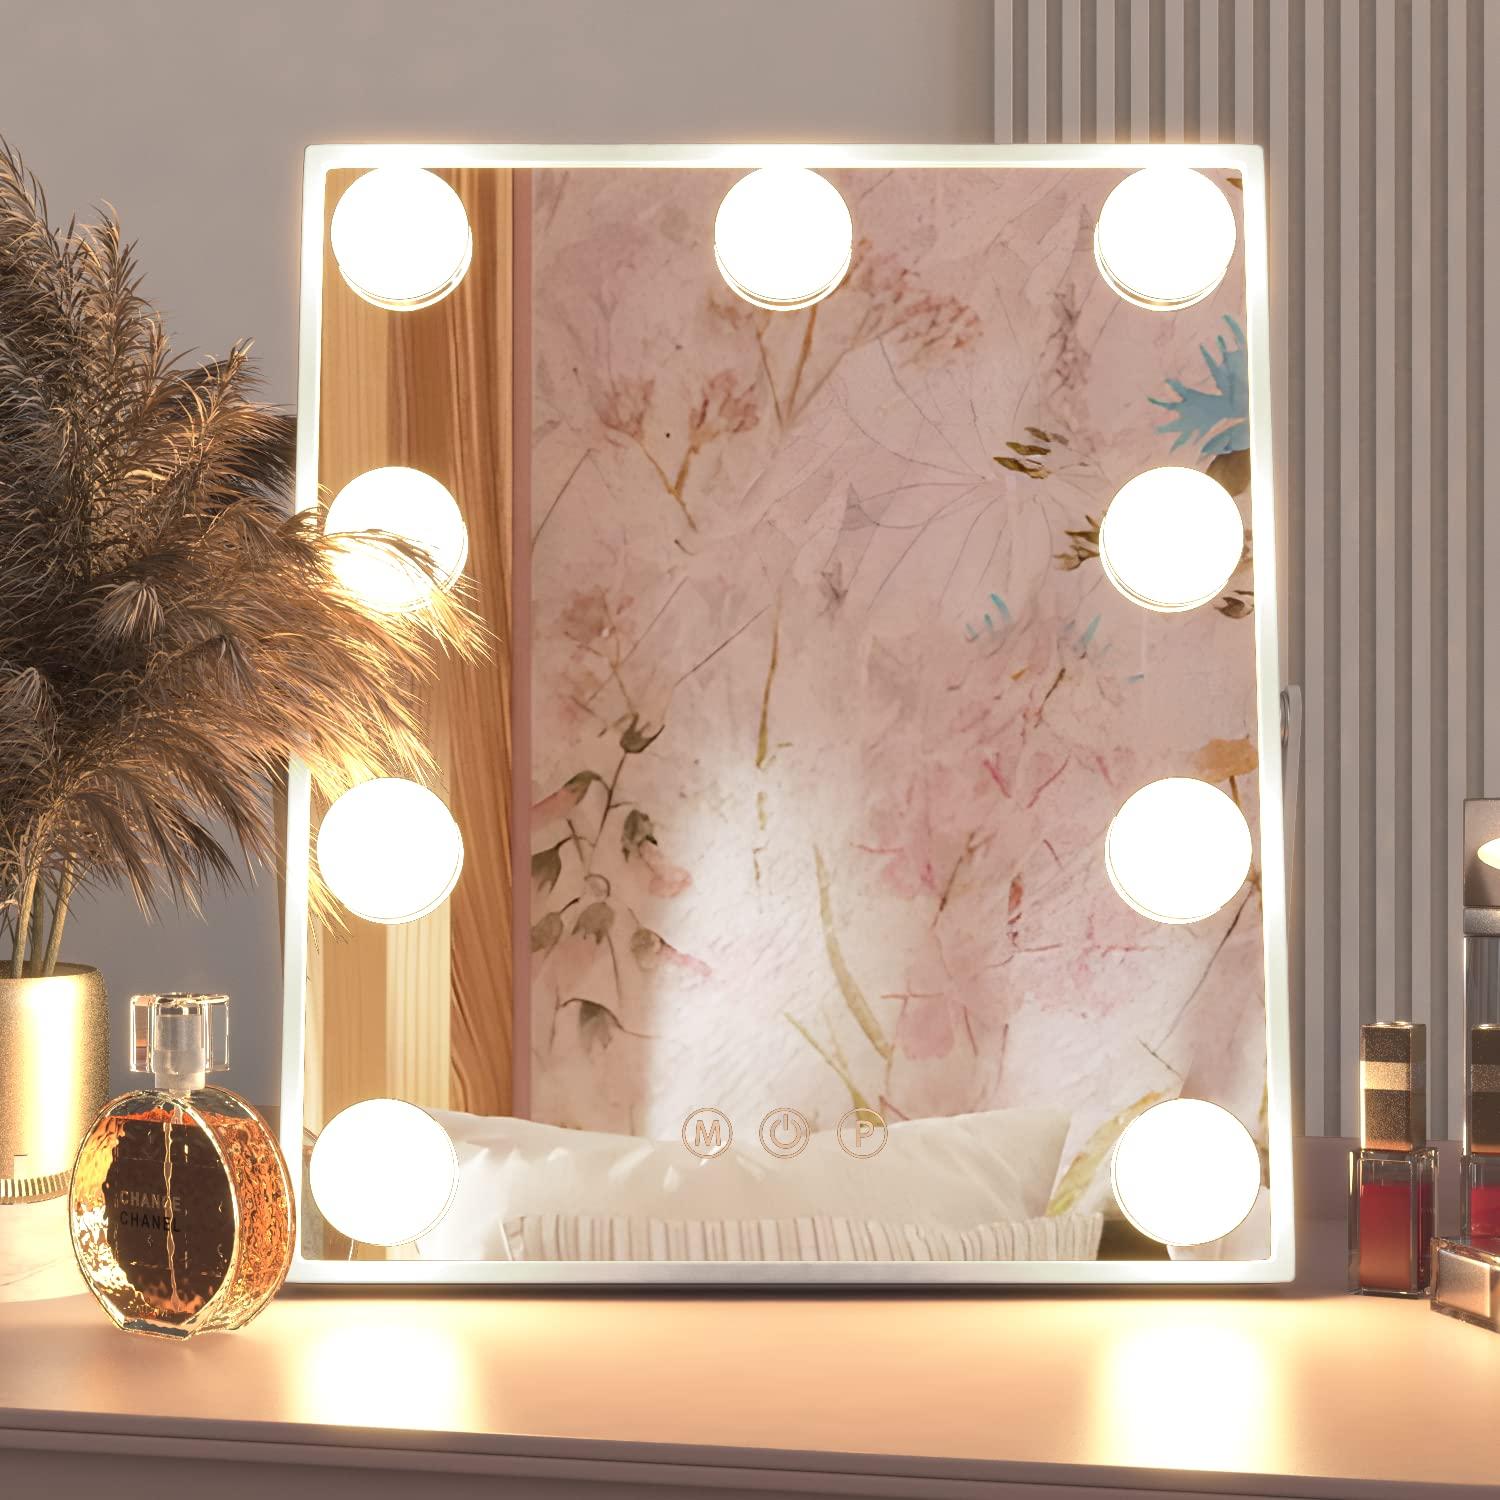 Manocorro 9 LED Bulbs Hollywood Vanity Mirror with Lights Hollywood Makeup Mirror  Small Vanity Lighted Mirror with 3 Color Lighting Modes Smart Touch Control  Plug in Light Up White